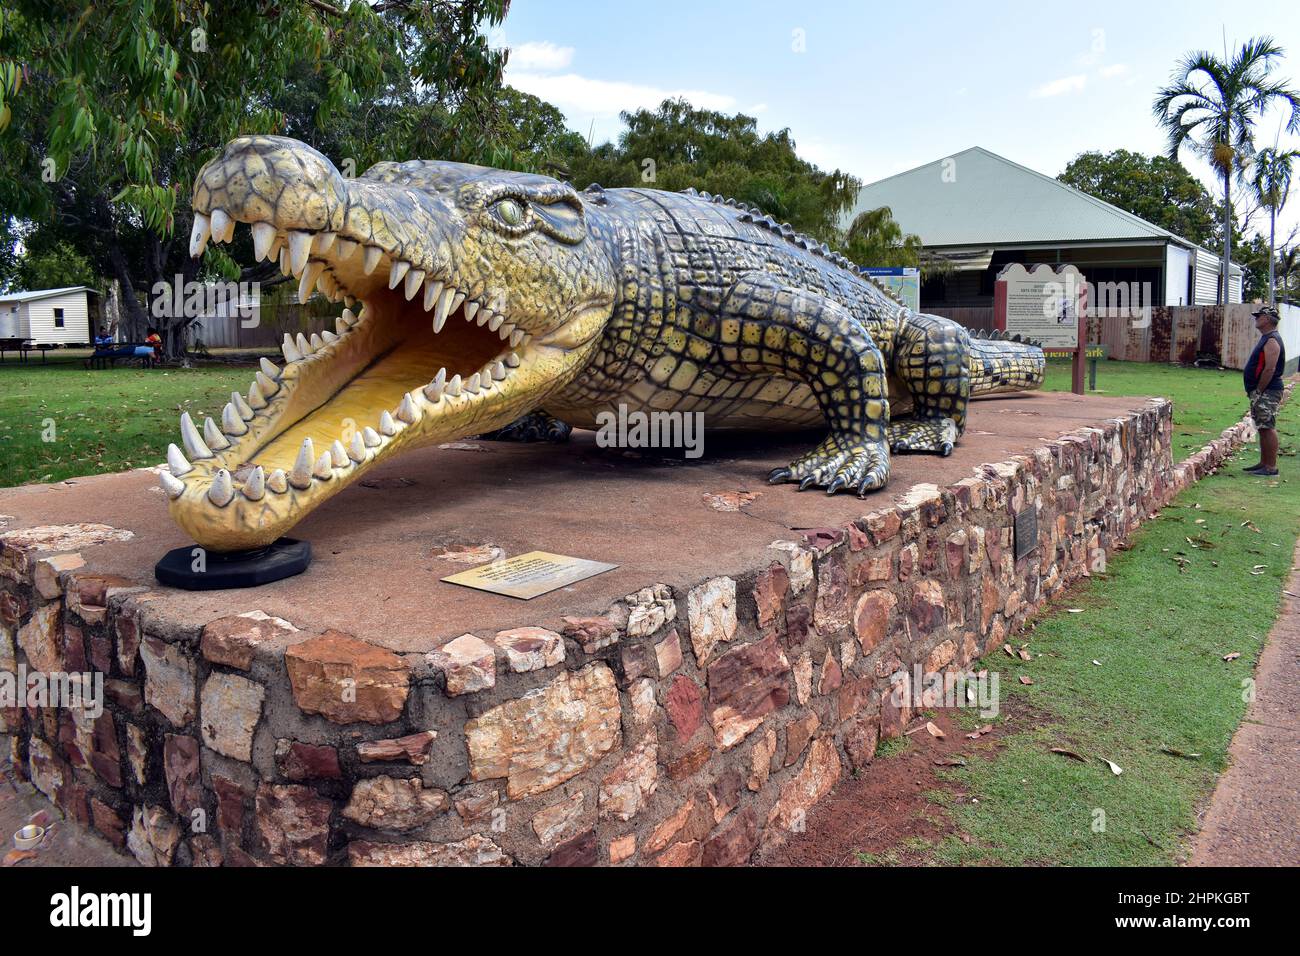 Krys-The Savannah King is an impression of the world's largest crocodile ever captured - 8.63 metres long Stock Photo